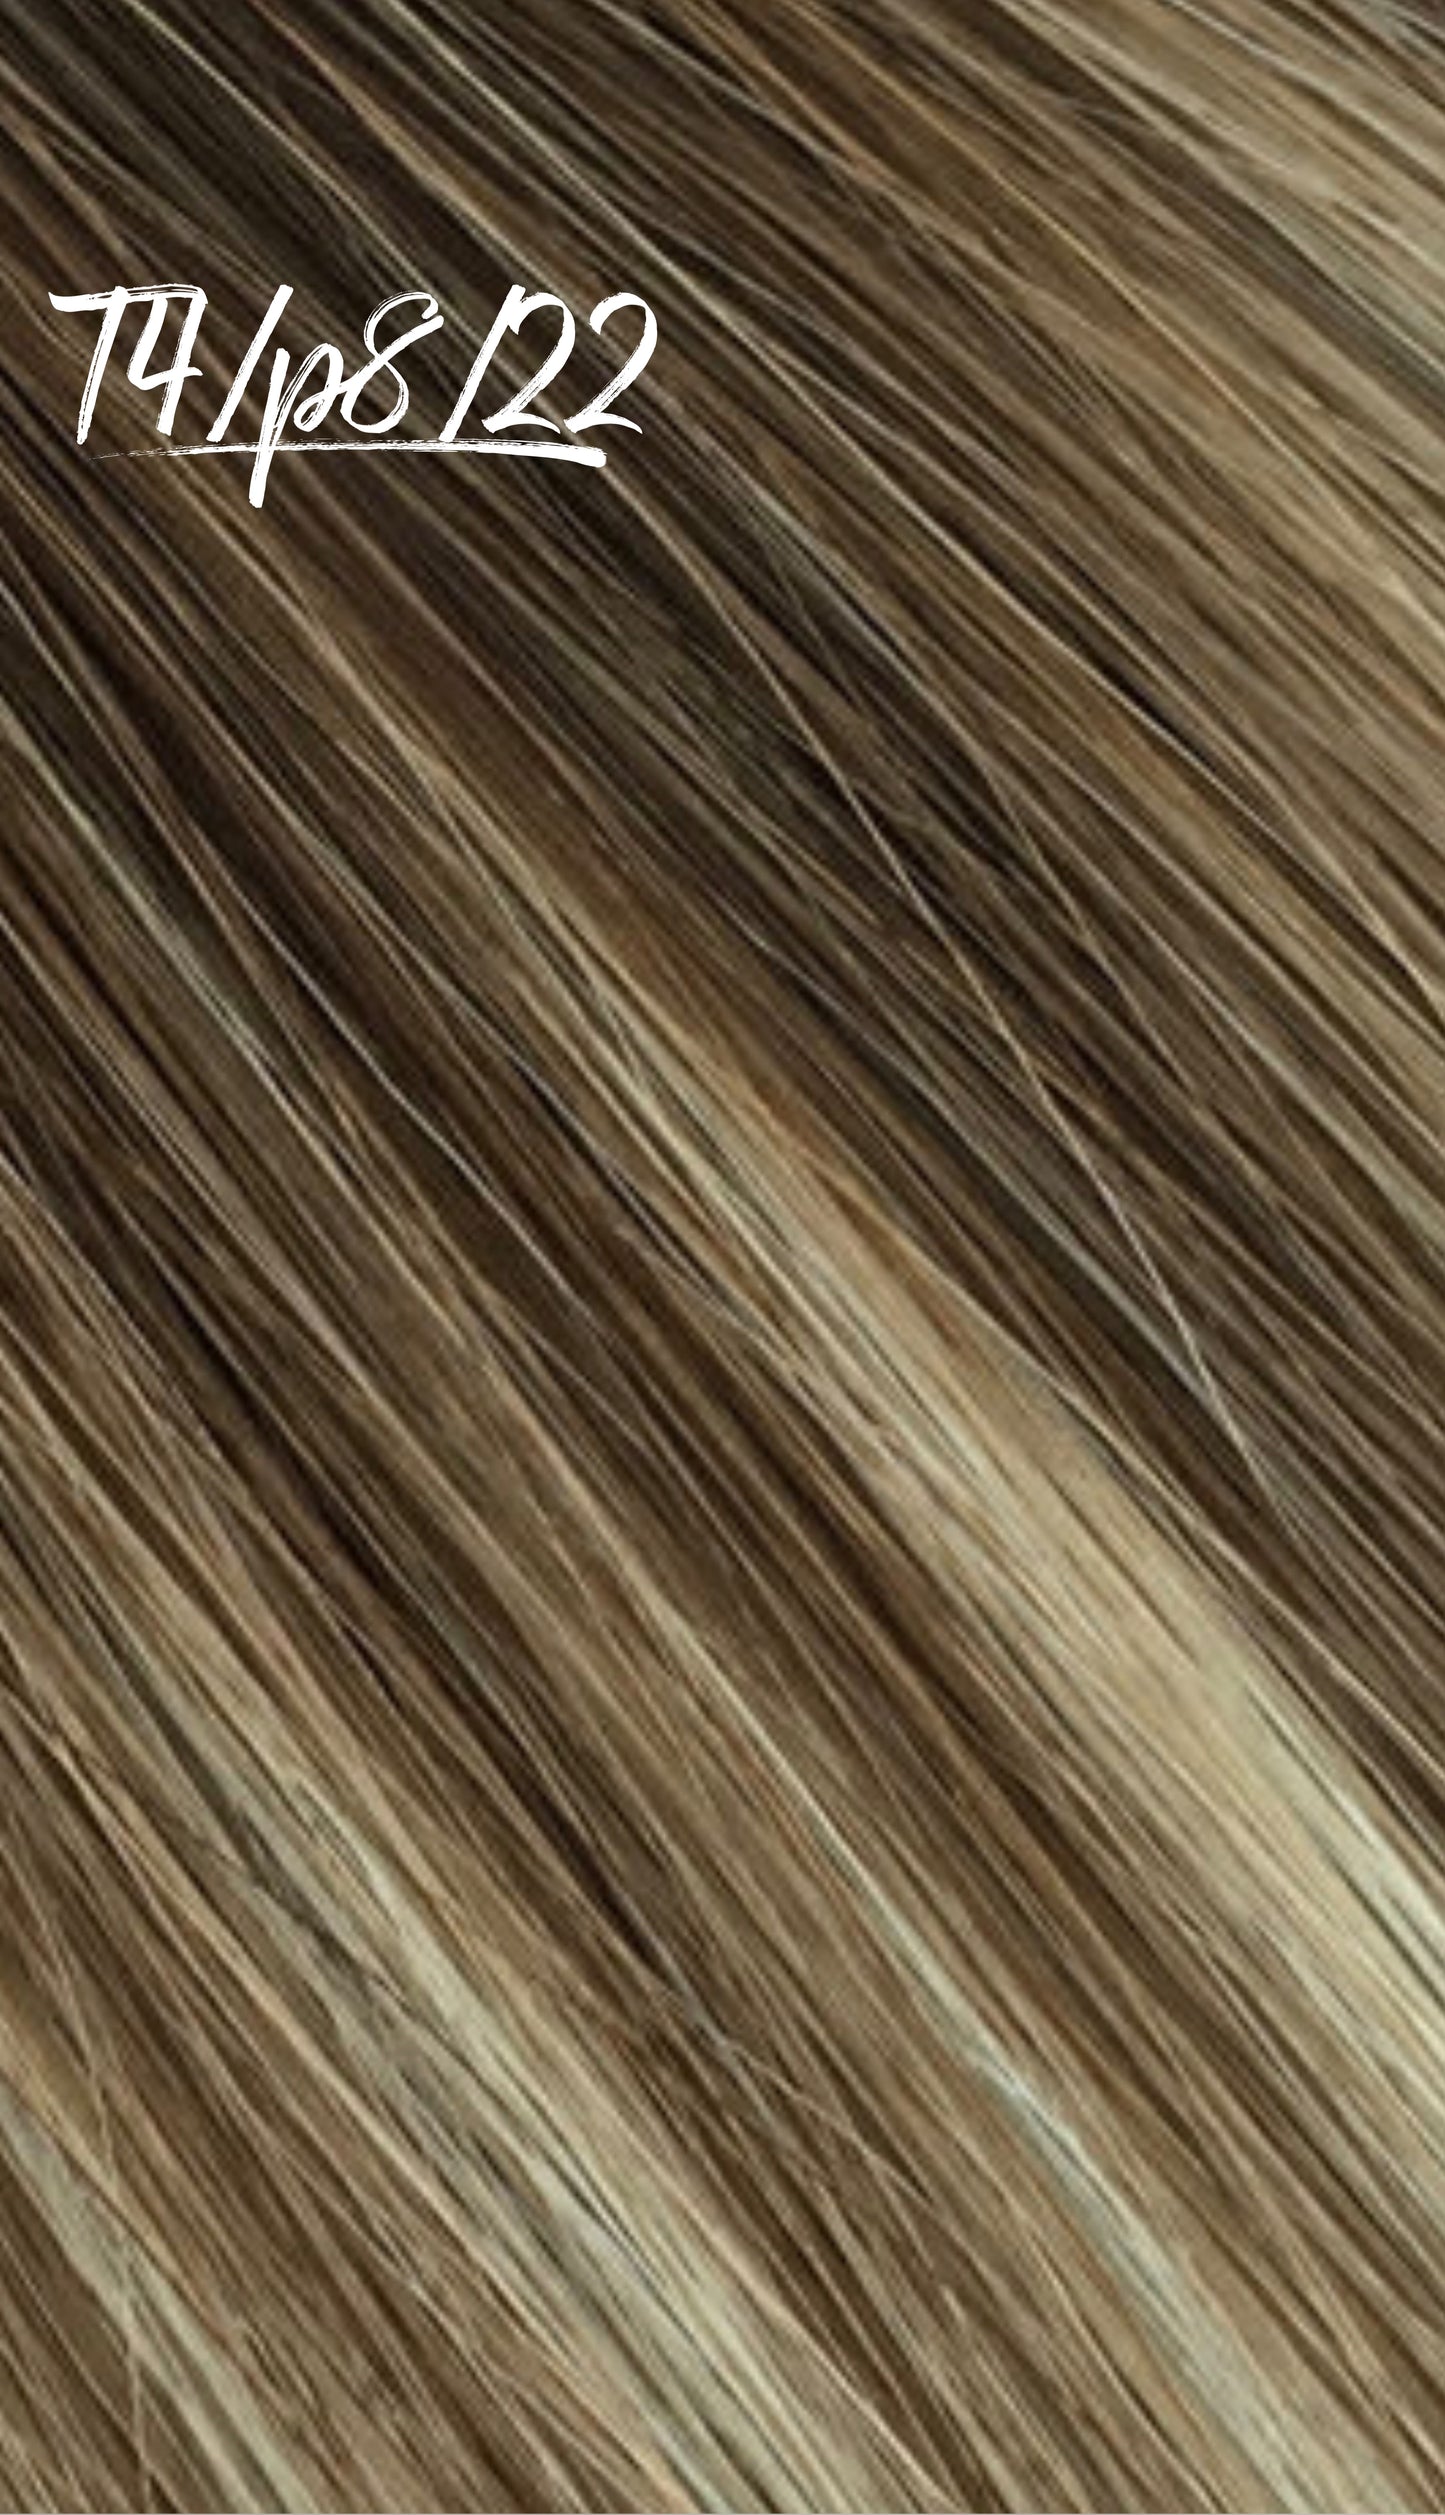 Luxury Quality Tape Hair Extensions